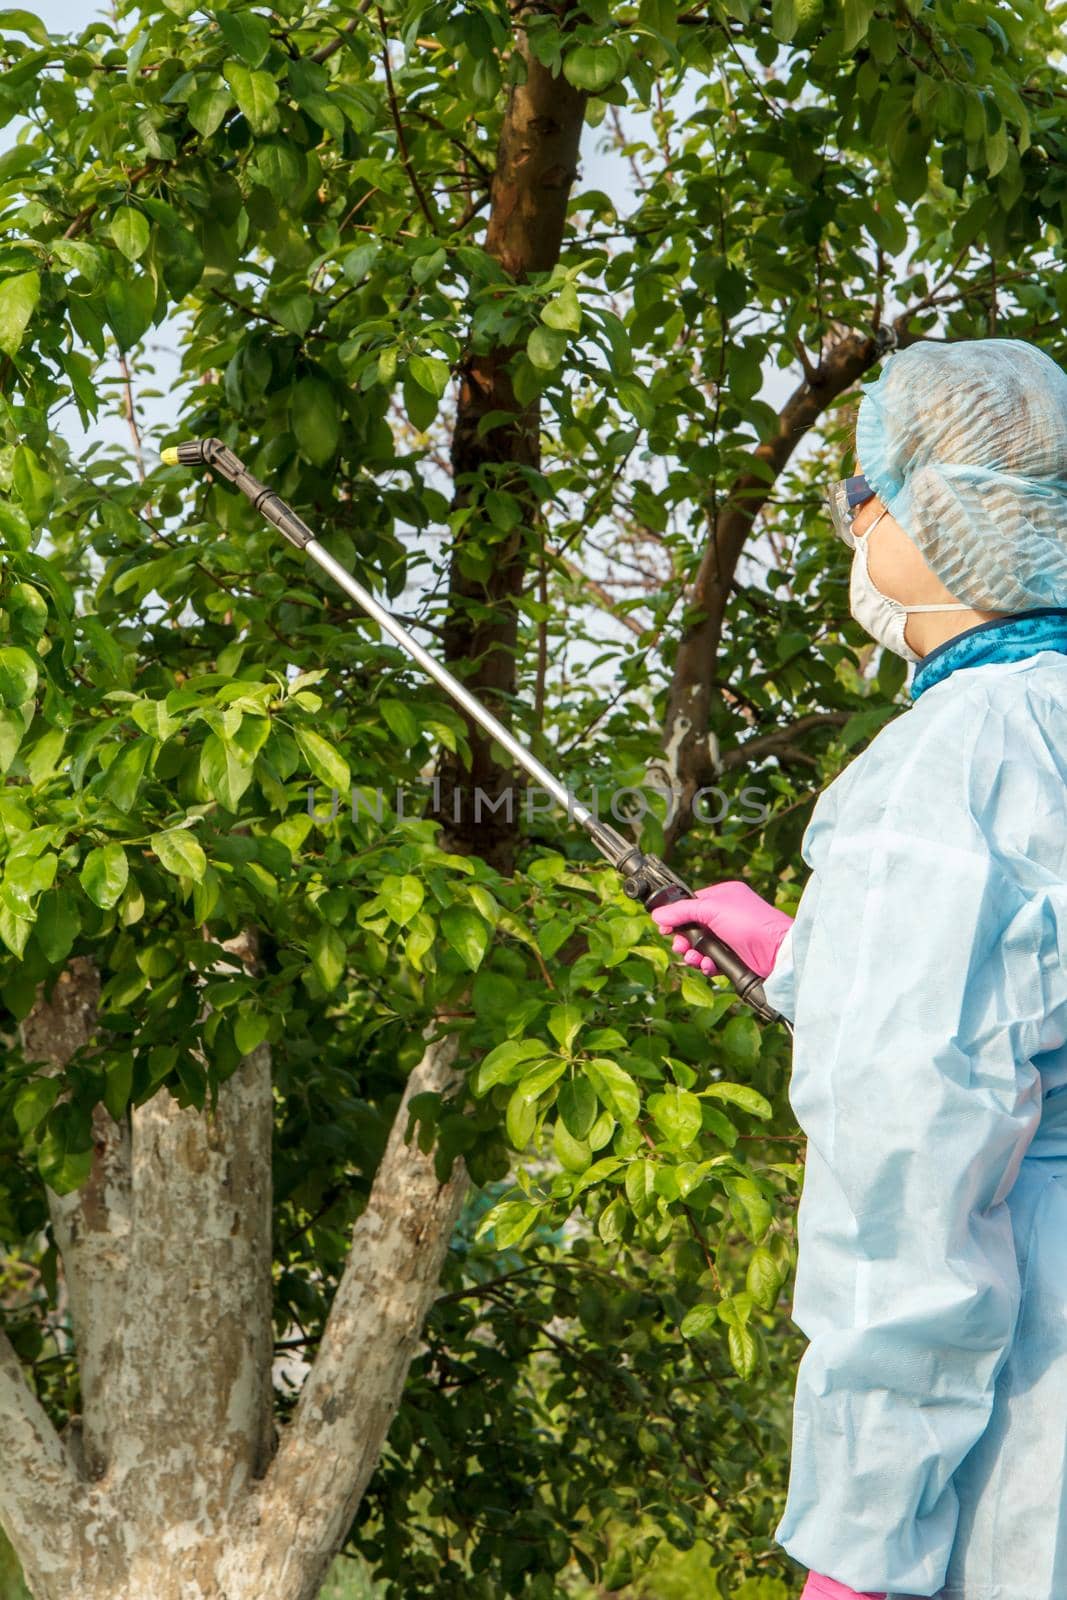 Woman in a protective suit is spraying apple trees from fungal disease or vermin using a pressure sprayer with chemicals in the orchard.